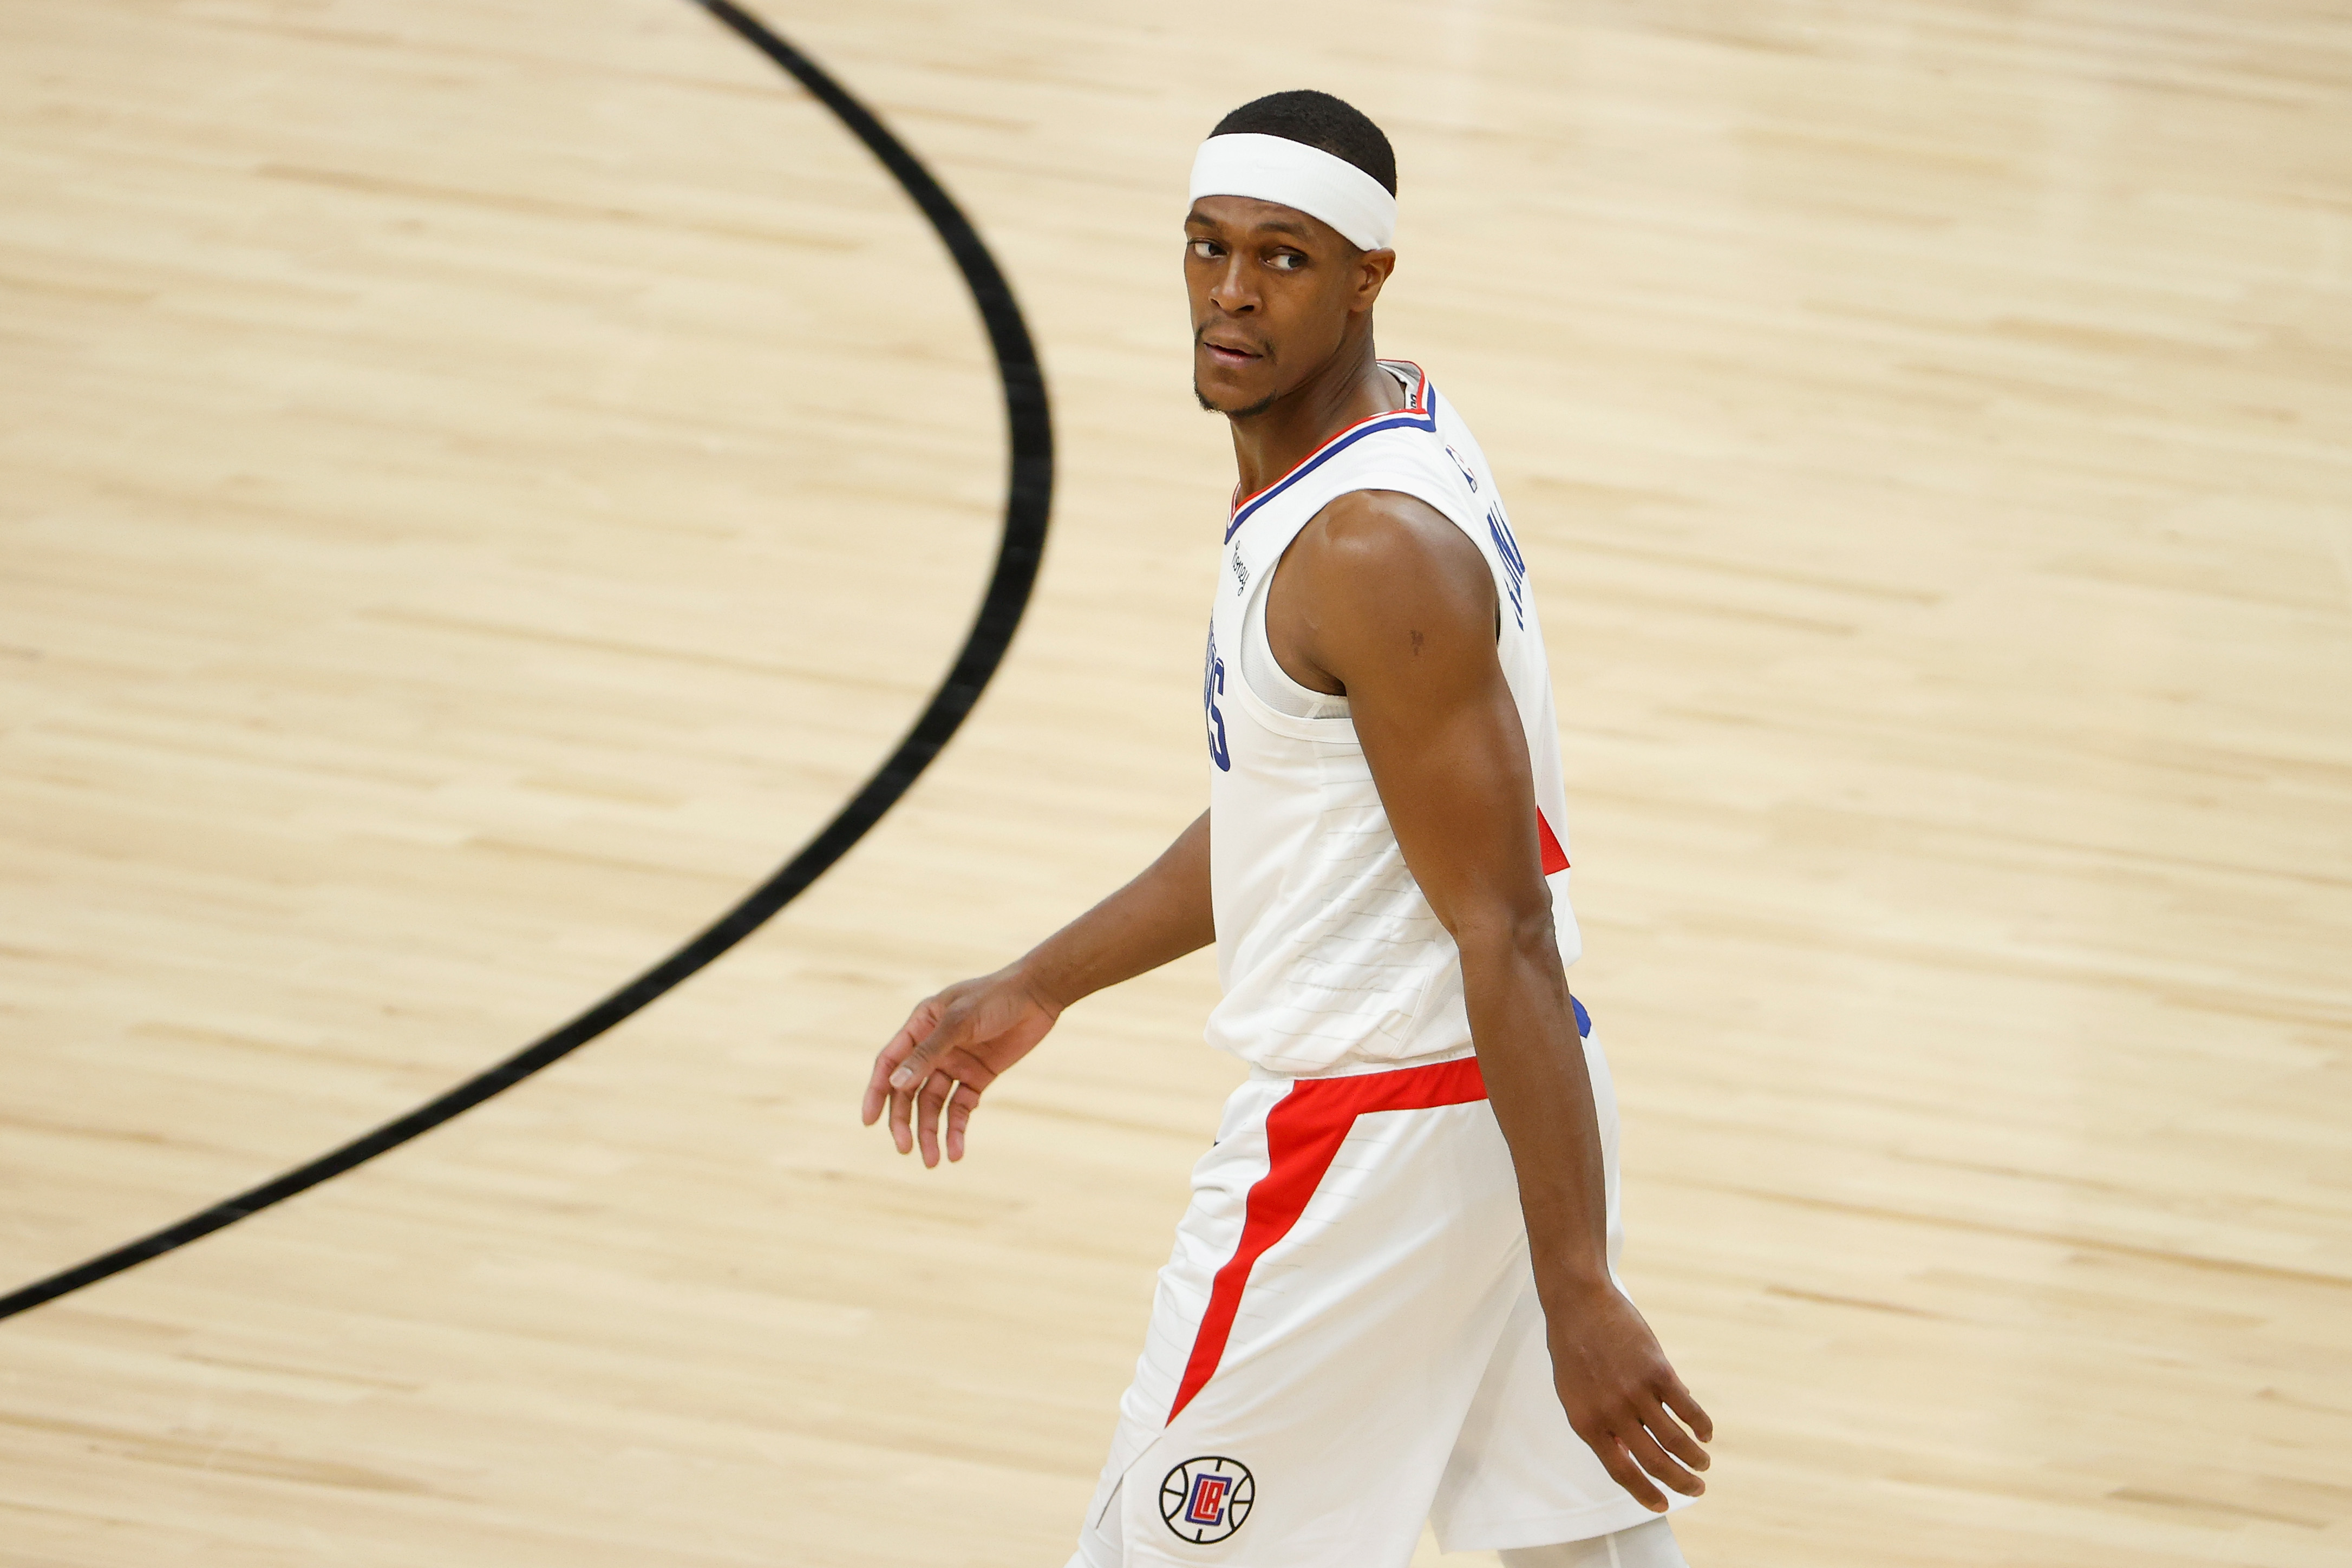 Rajon Rondo Reportedly Pulled A Gun On His Baby Mama: Details